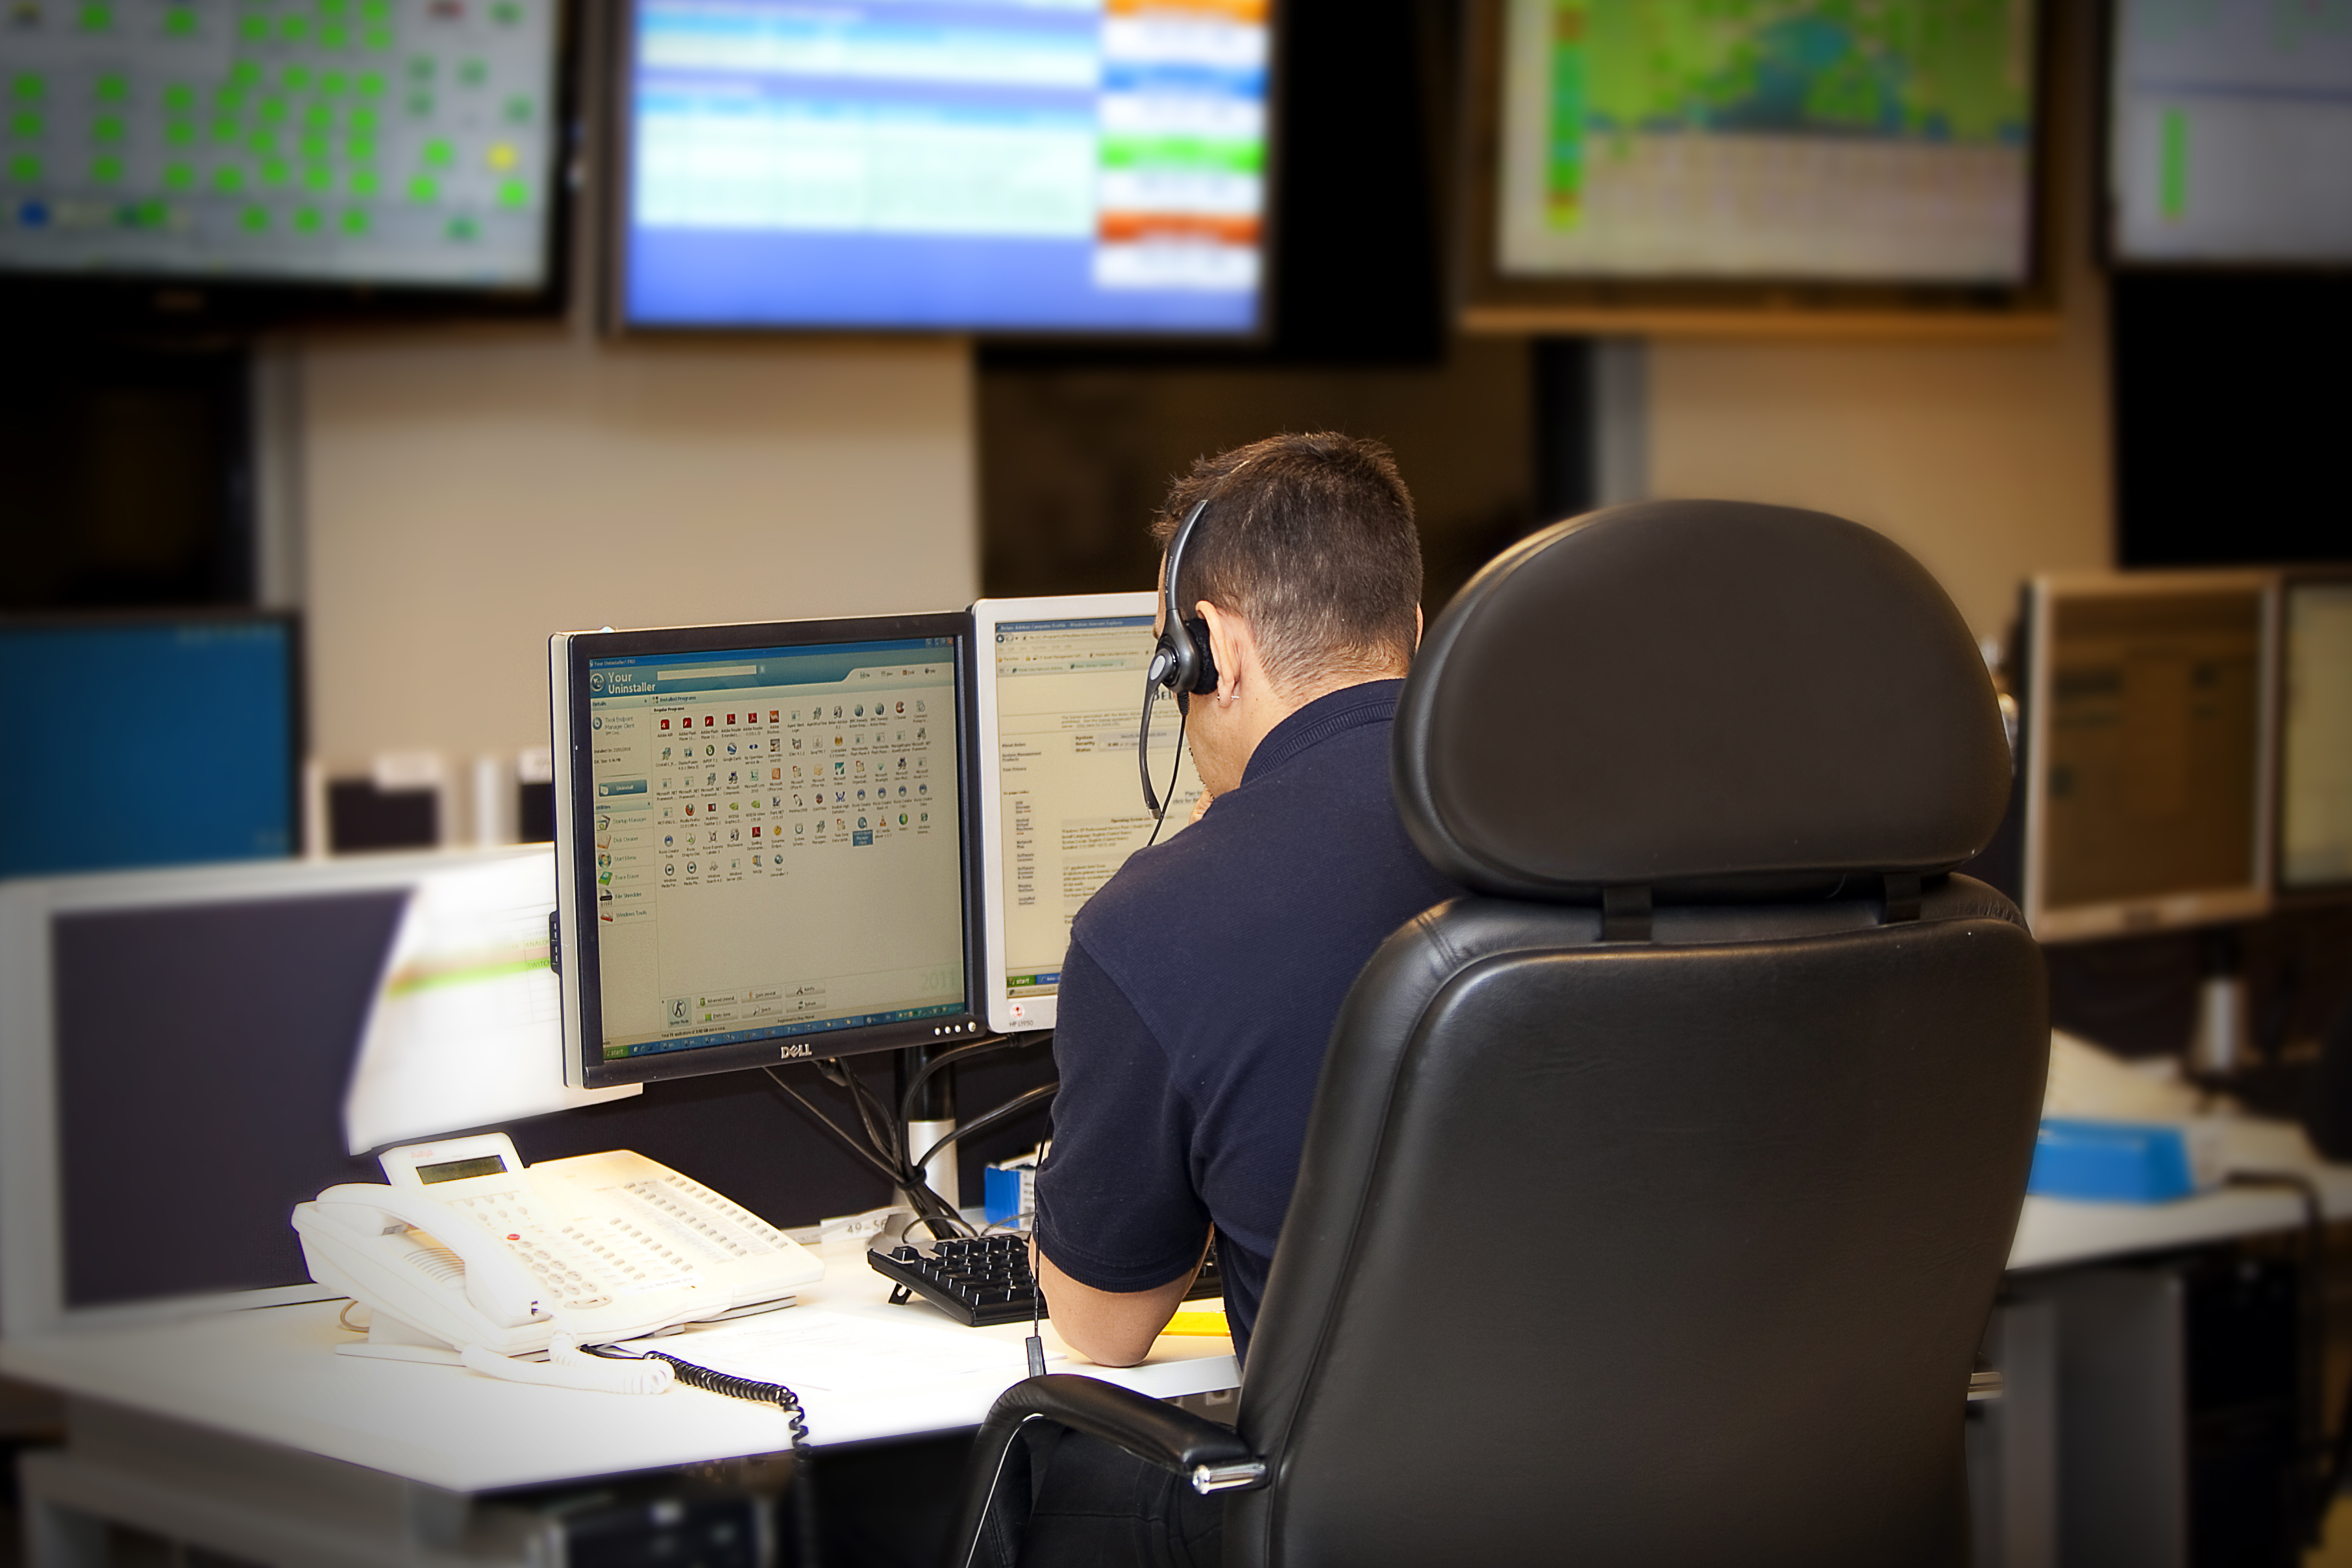 Prince George's County 911 - instilling confidence with managed services